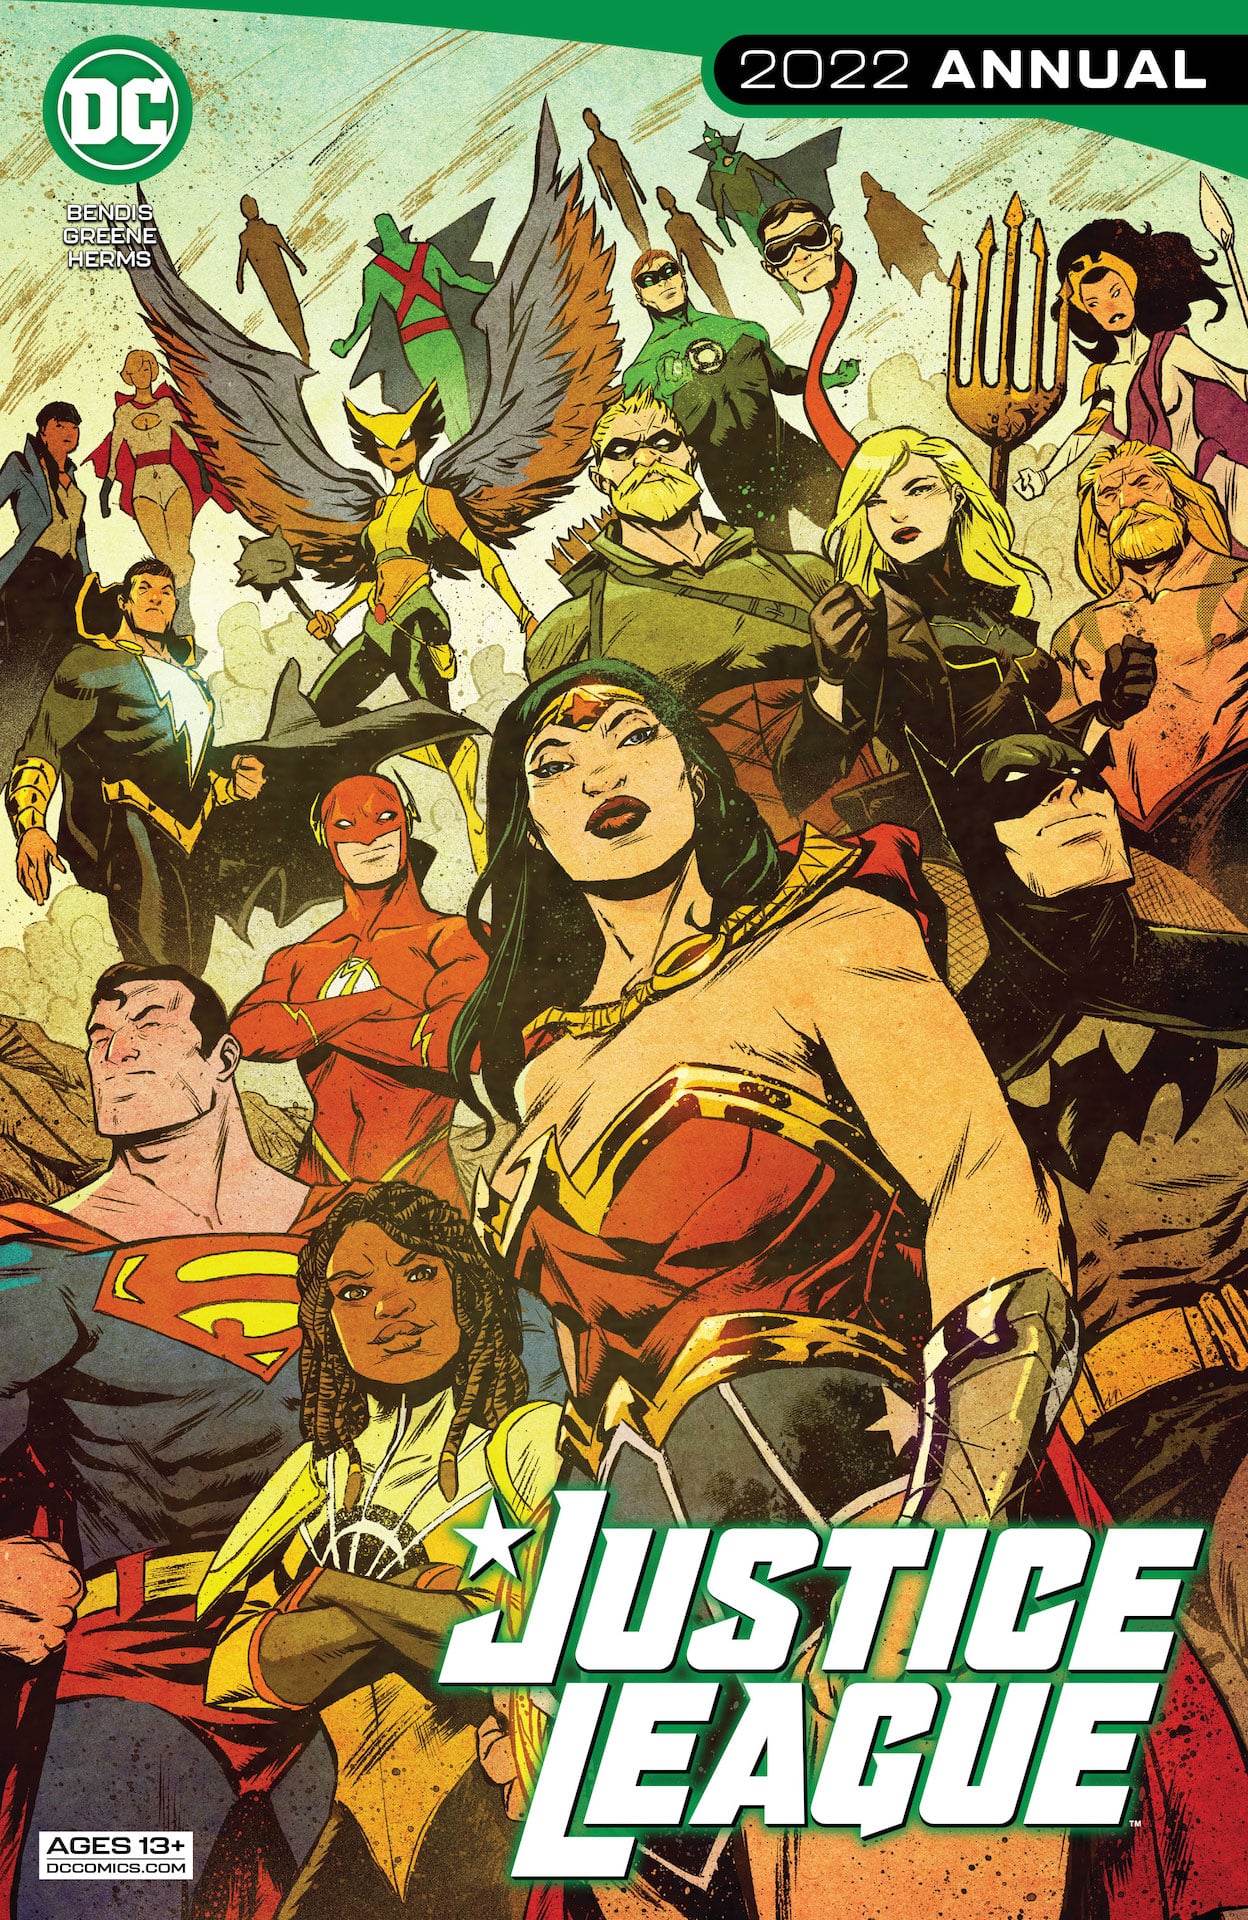 DC Preview: Justice League #1: 2021 Annual